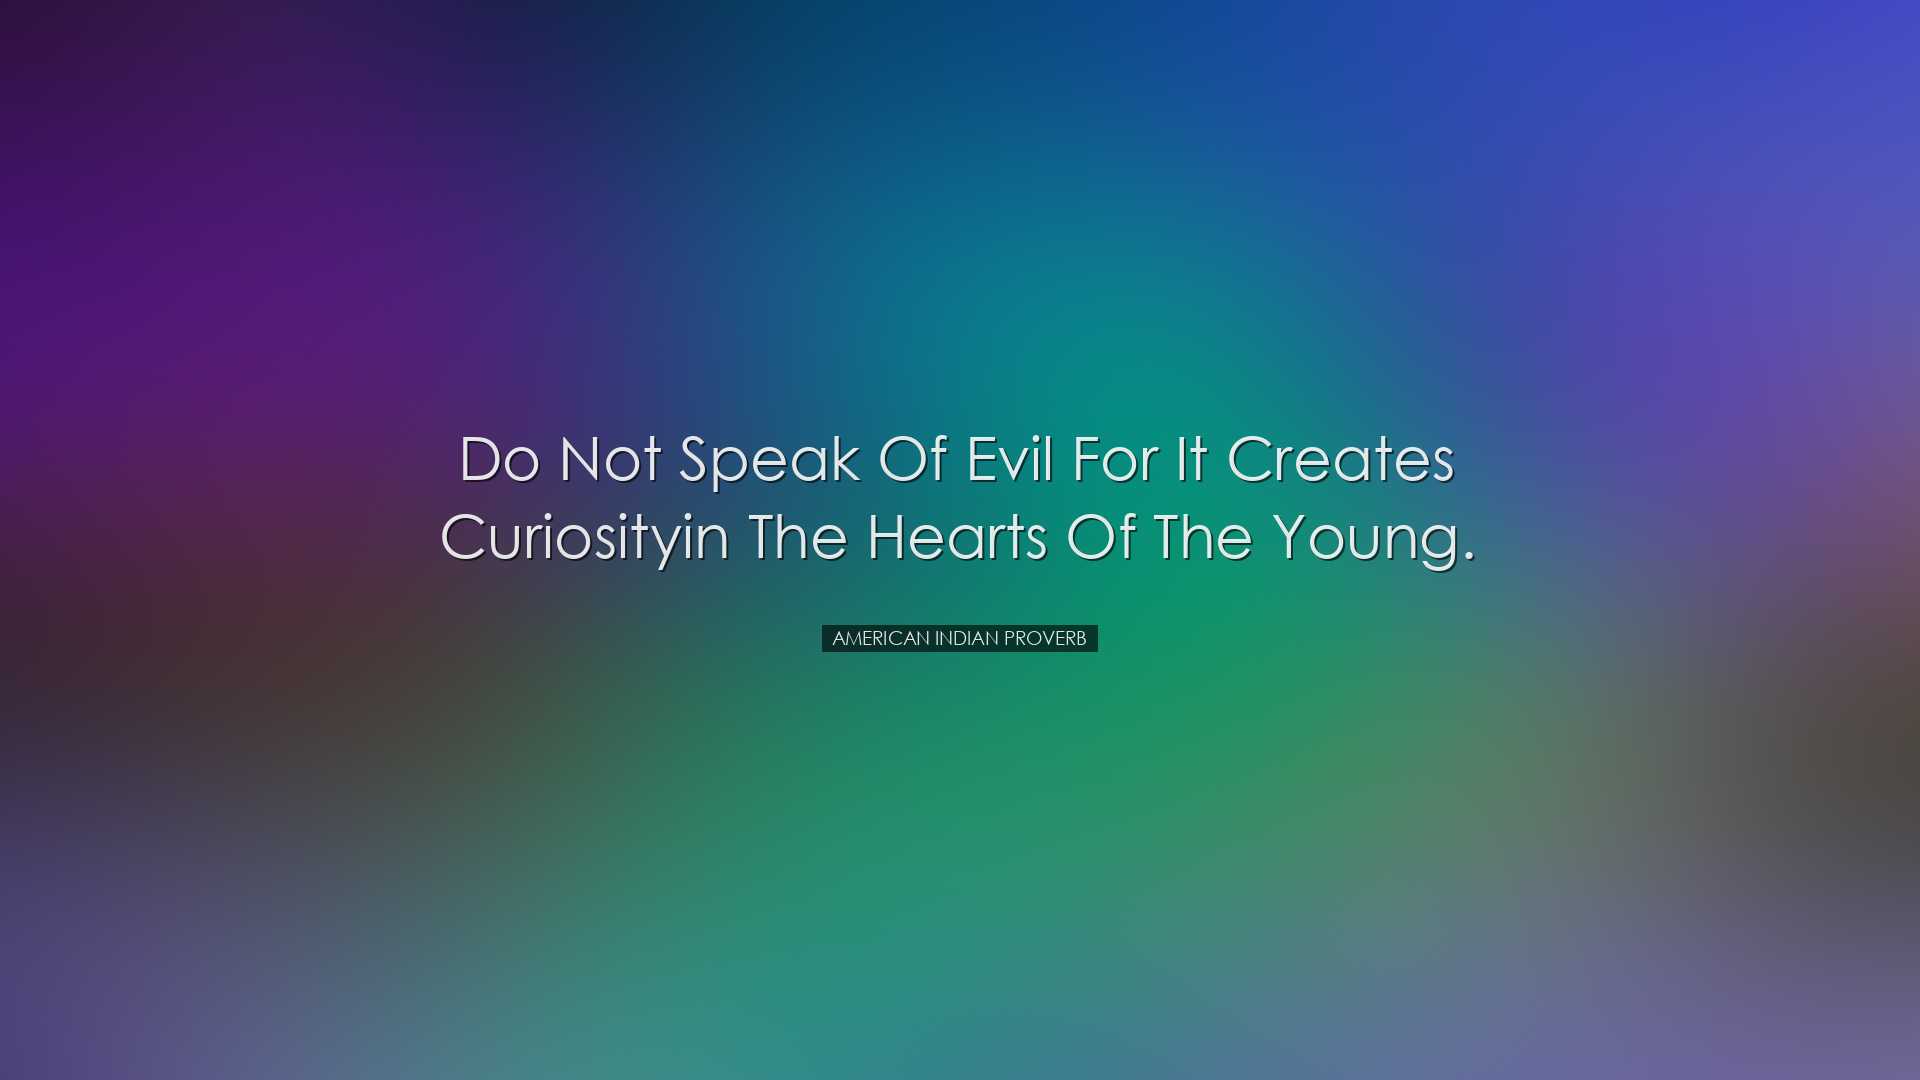 Do not speak of evil for it creates curiosityin the hearts of the